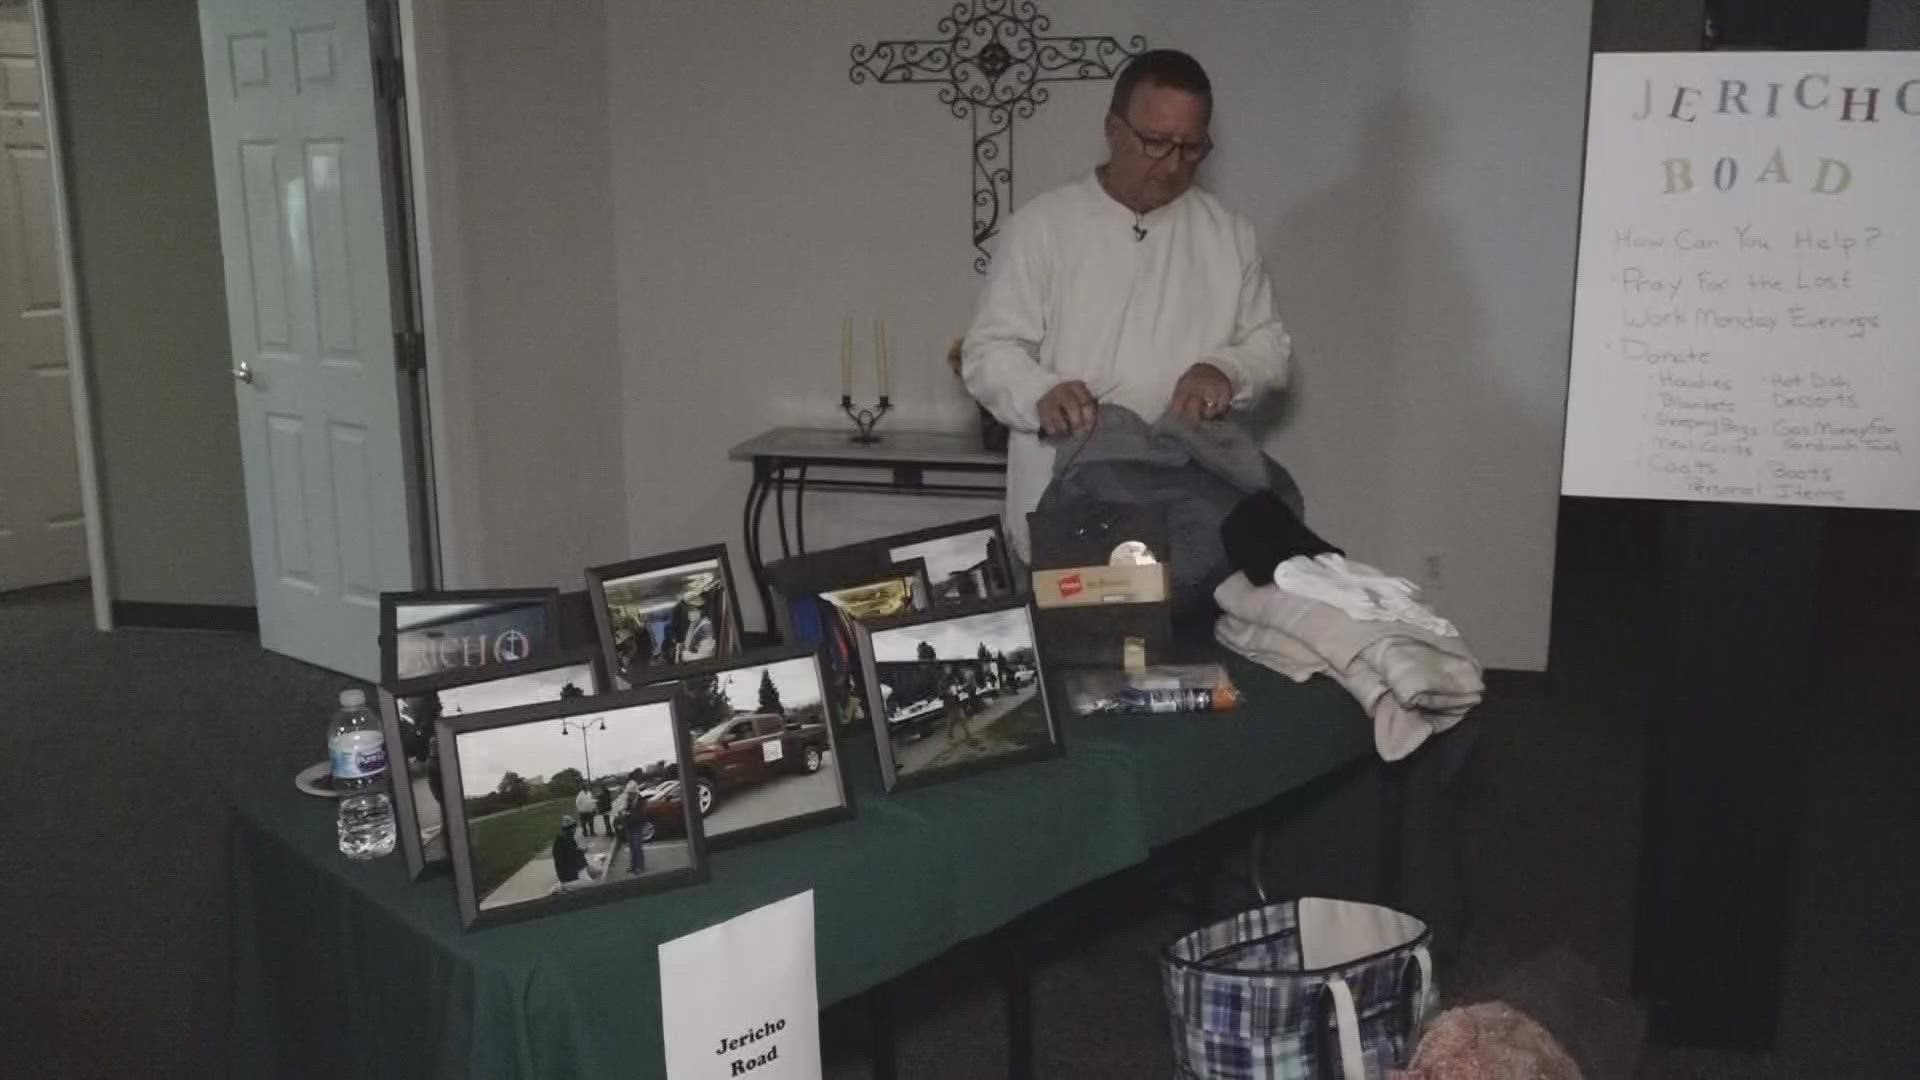 Each organization had a table where they explained the programs available that focus on helping the Bangor area's most underprivileged community members.